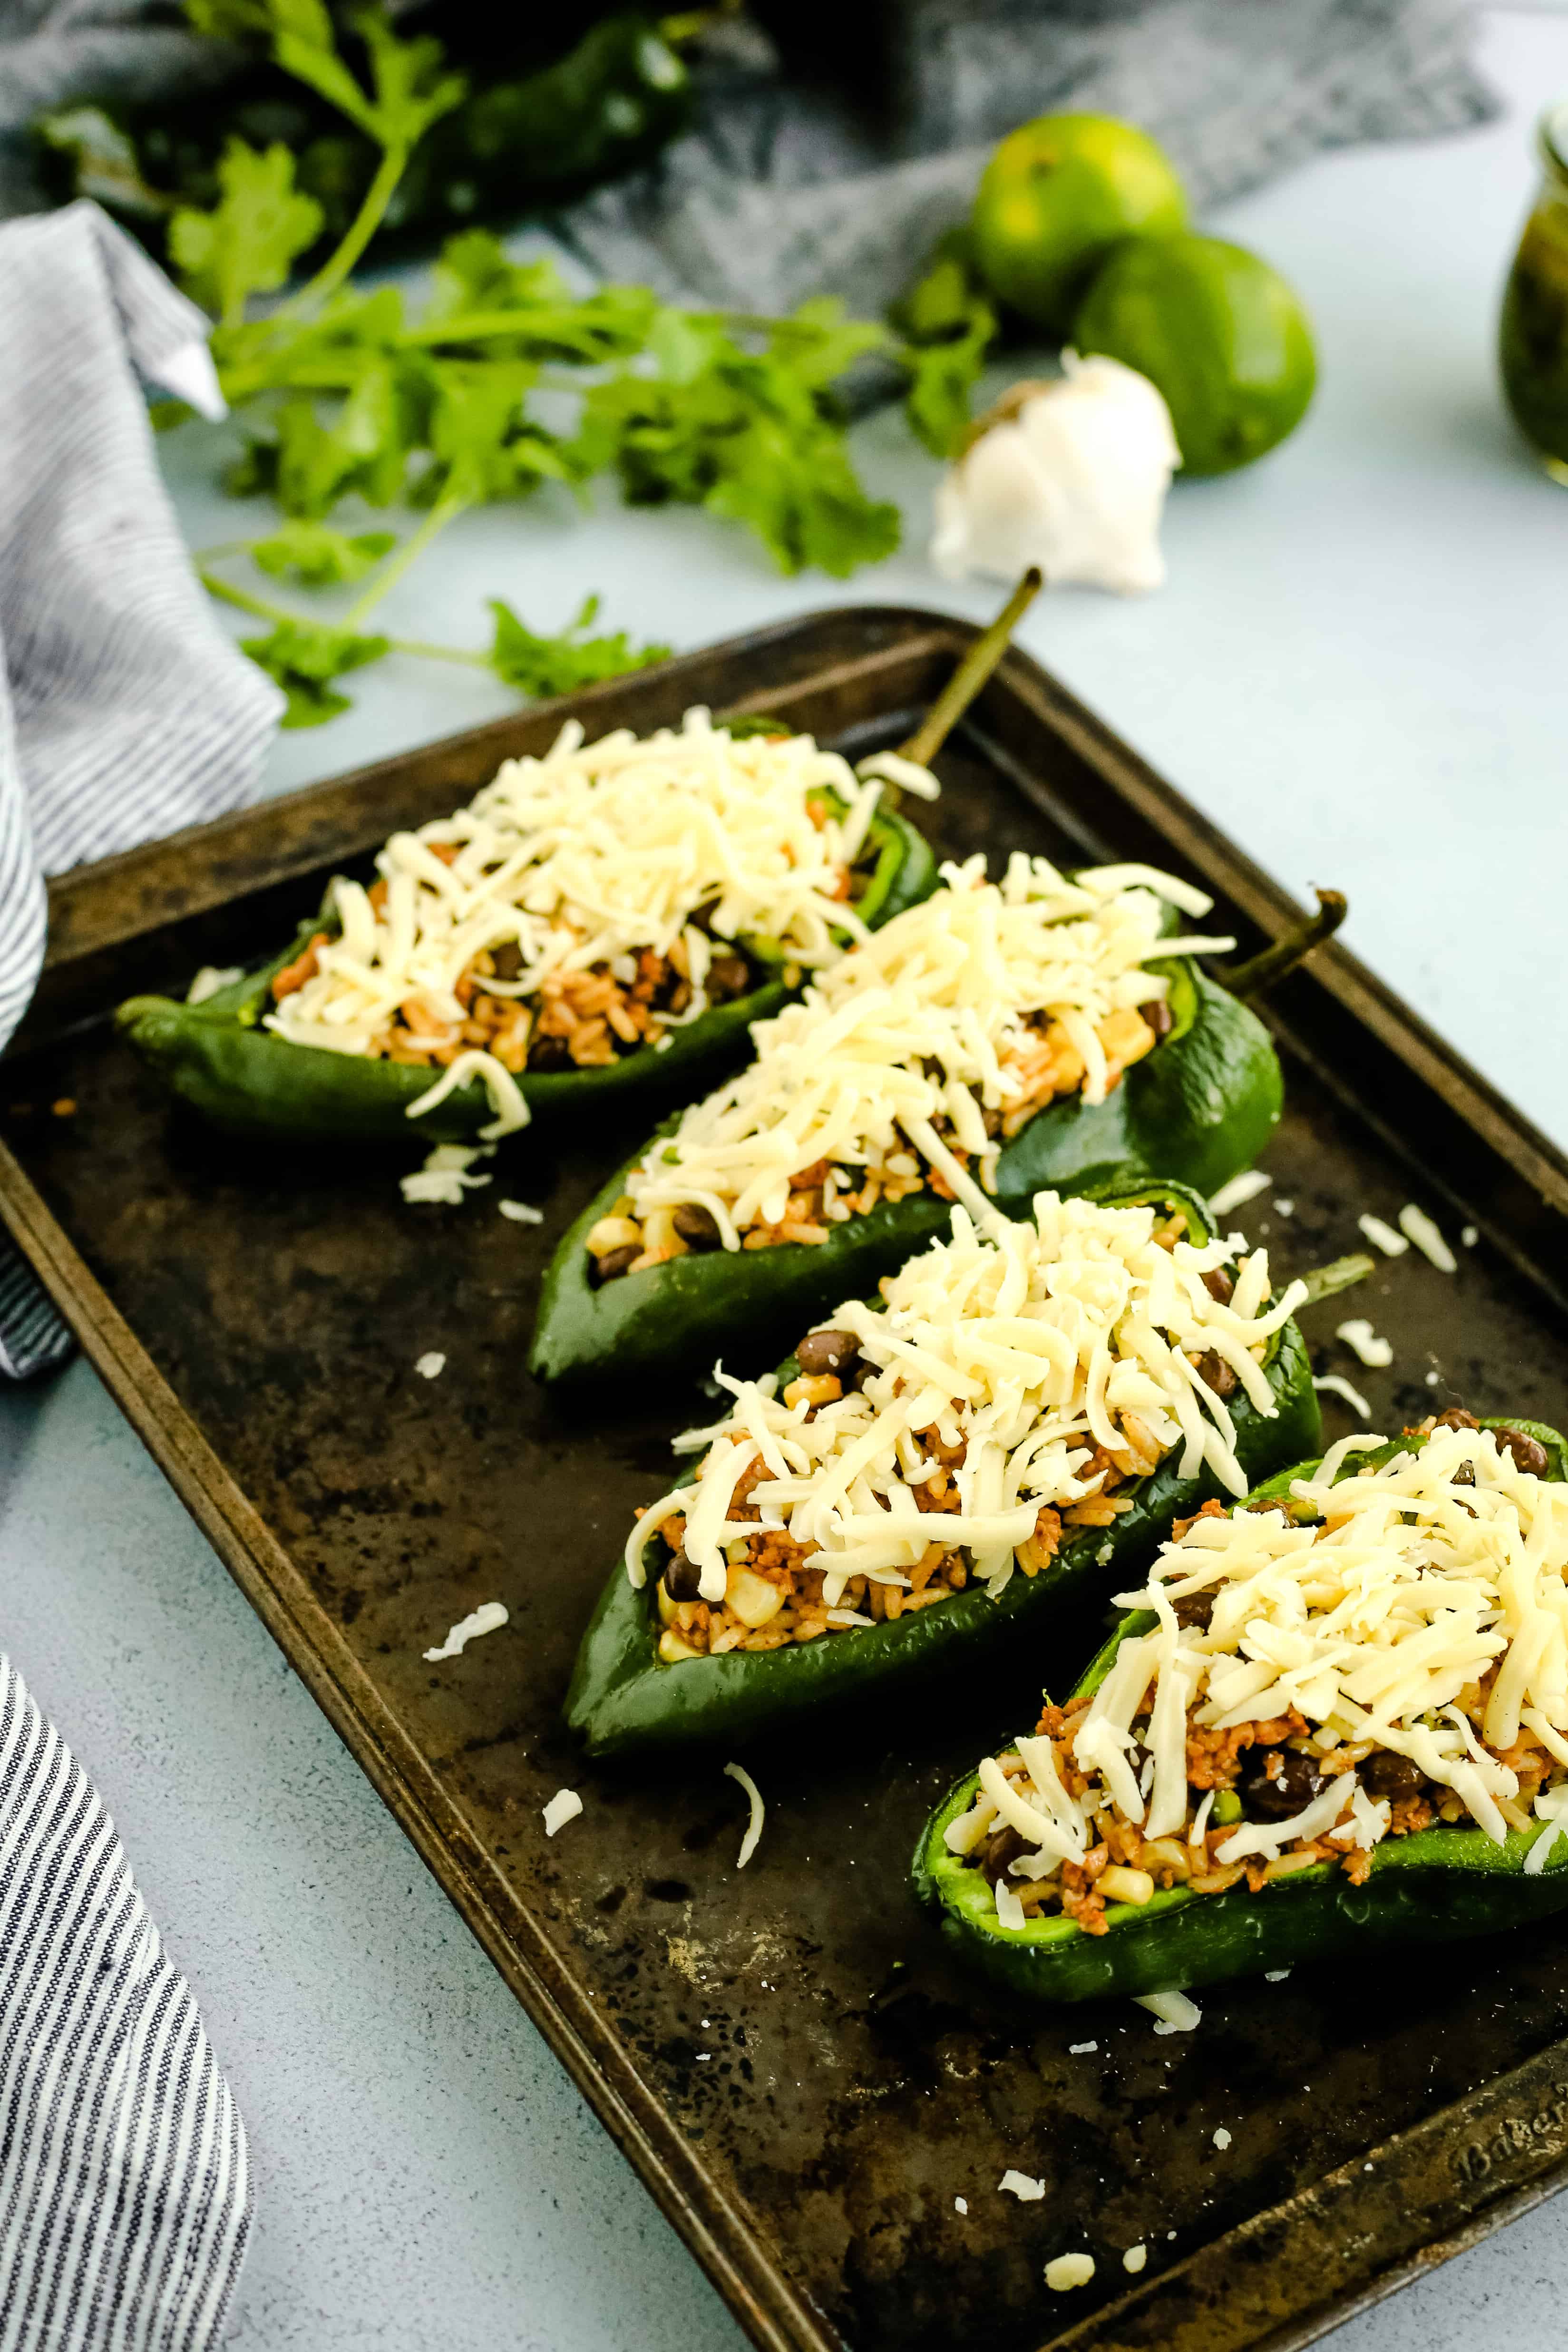 Angled view of stuffed poblano peppers on a rustic metal sheet pan, topped with shredded cheese prior to being baked in the oven